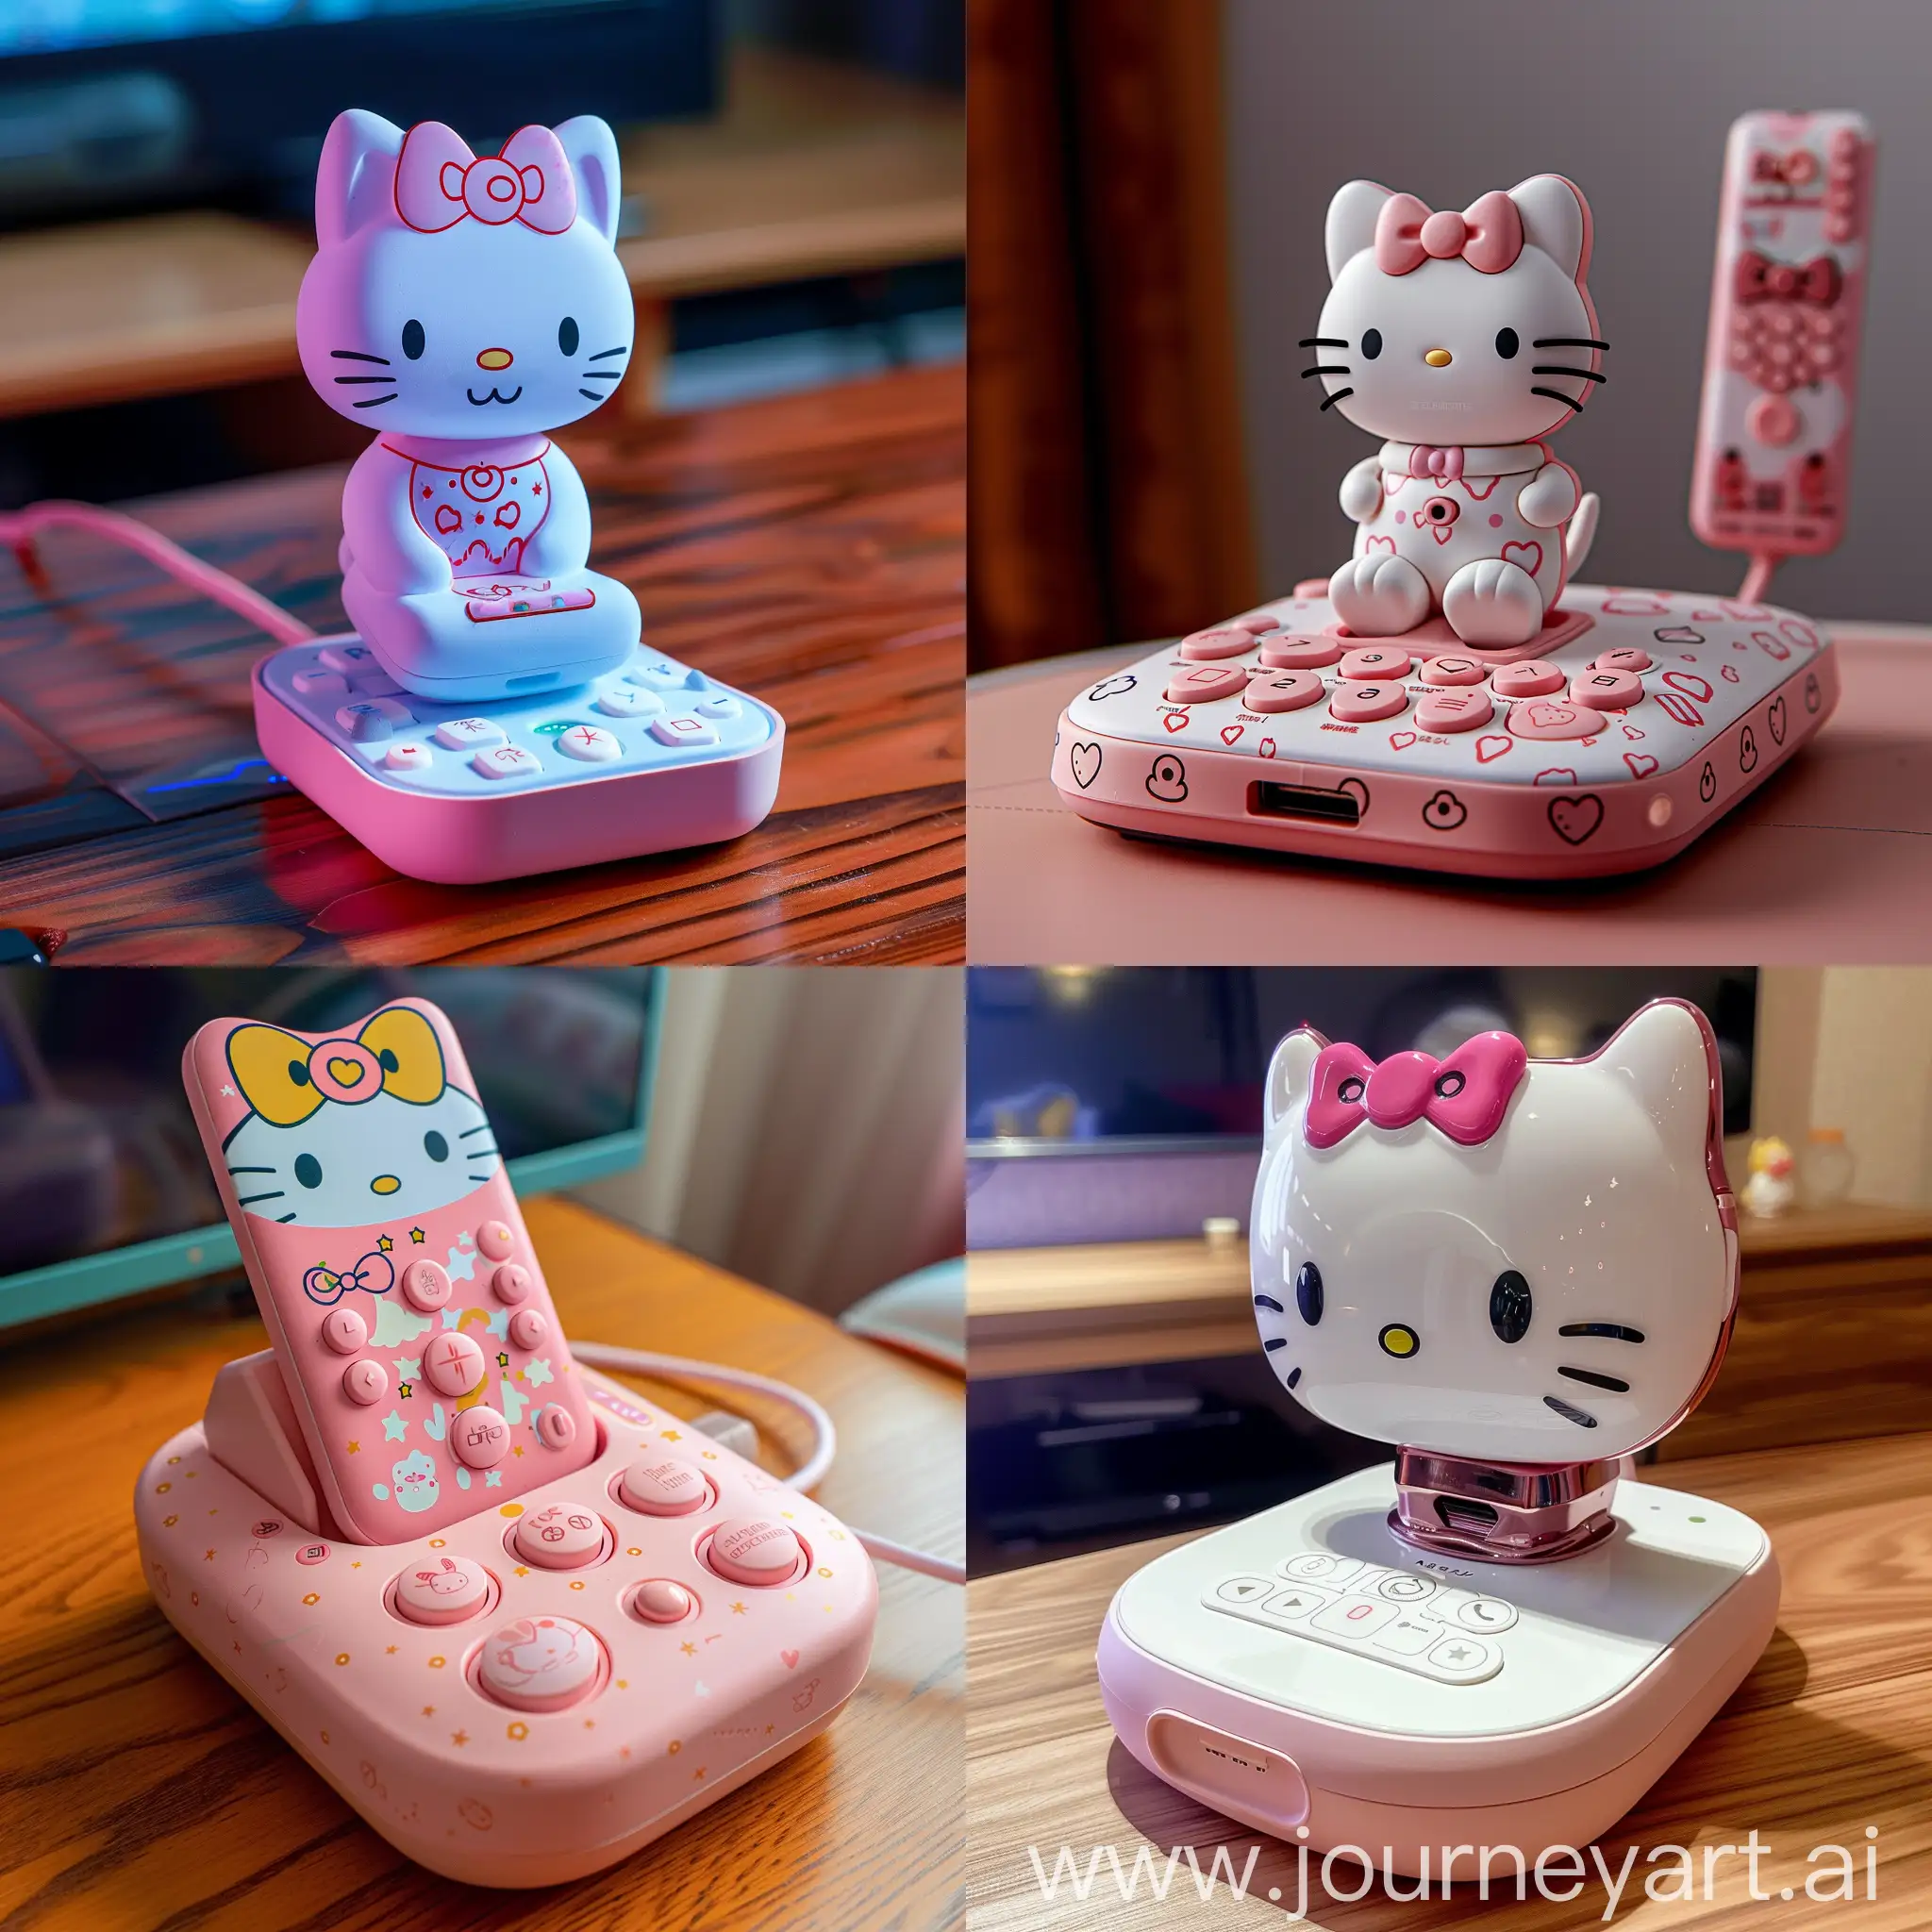 Adorable-Hello-Kitty-Themed-Wireless-Charging-Stand